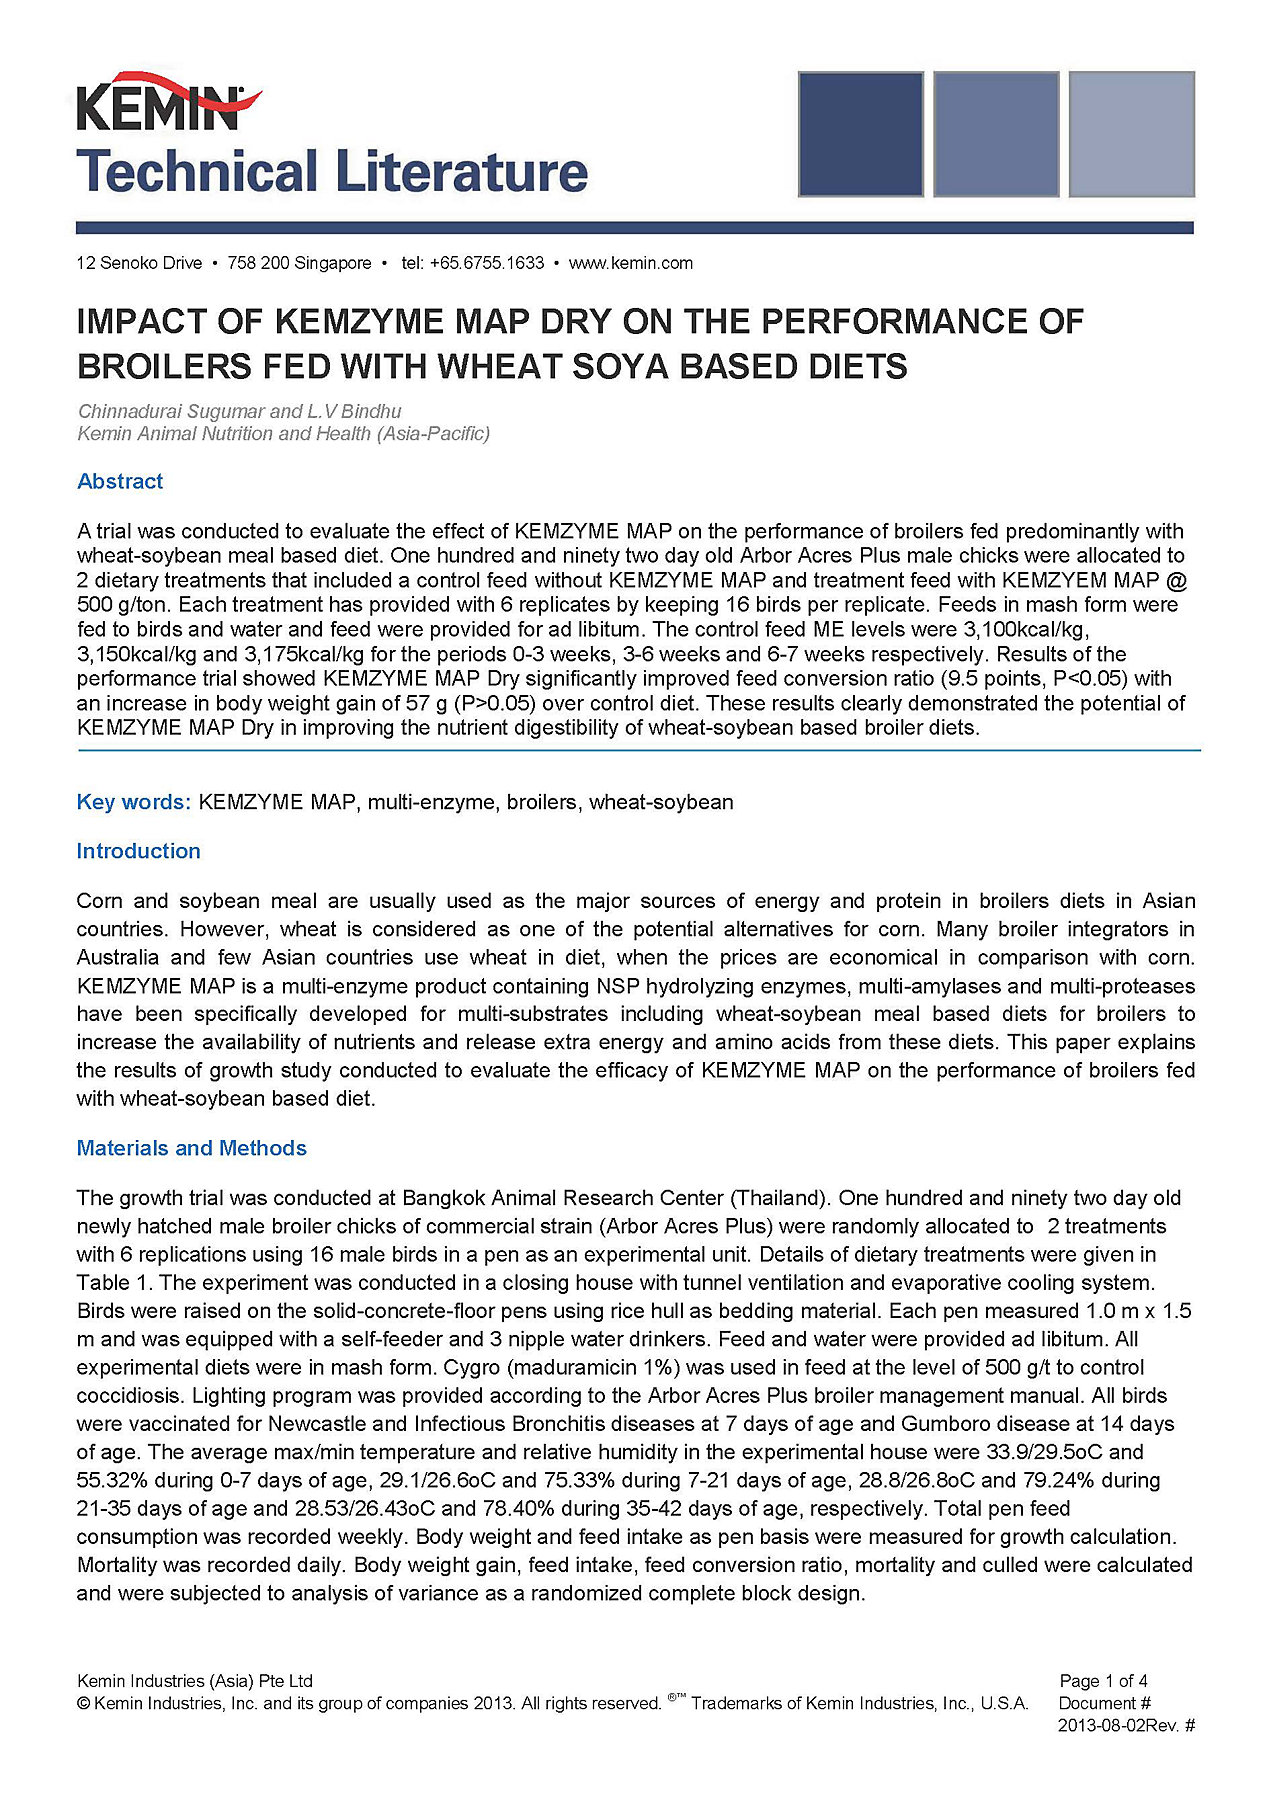 16_July_tl-13-00043_impact_of_kemzyme_map_on_the_performance_of_broilers_fed_with_wheat-soya_based_Page_1